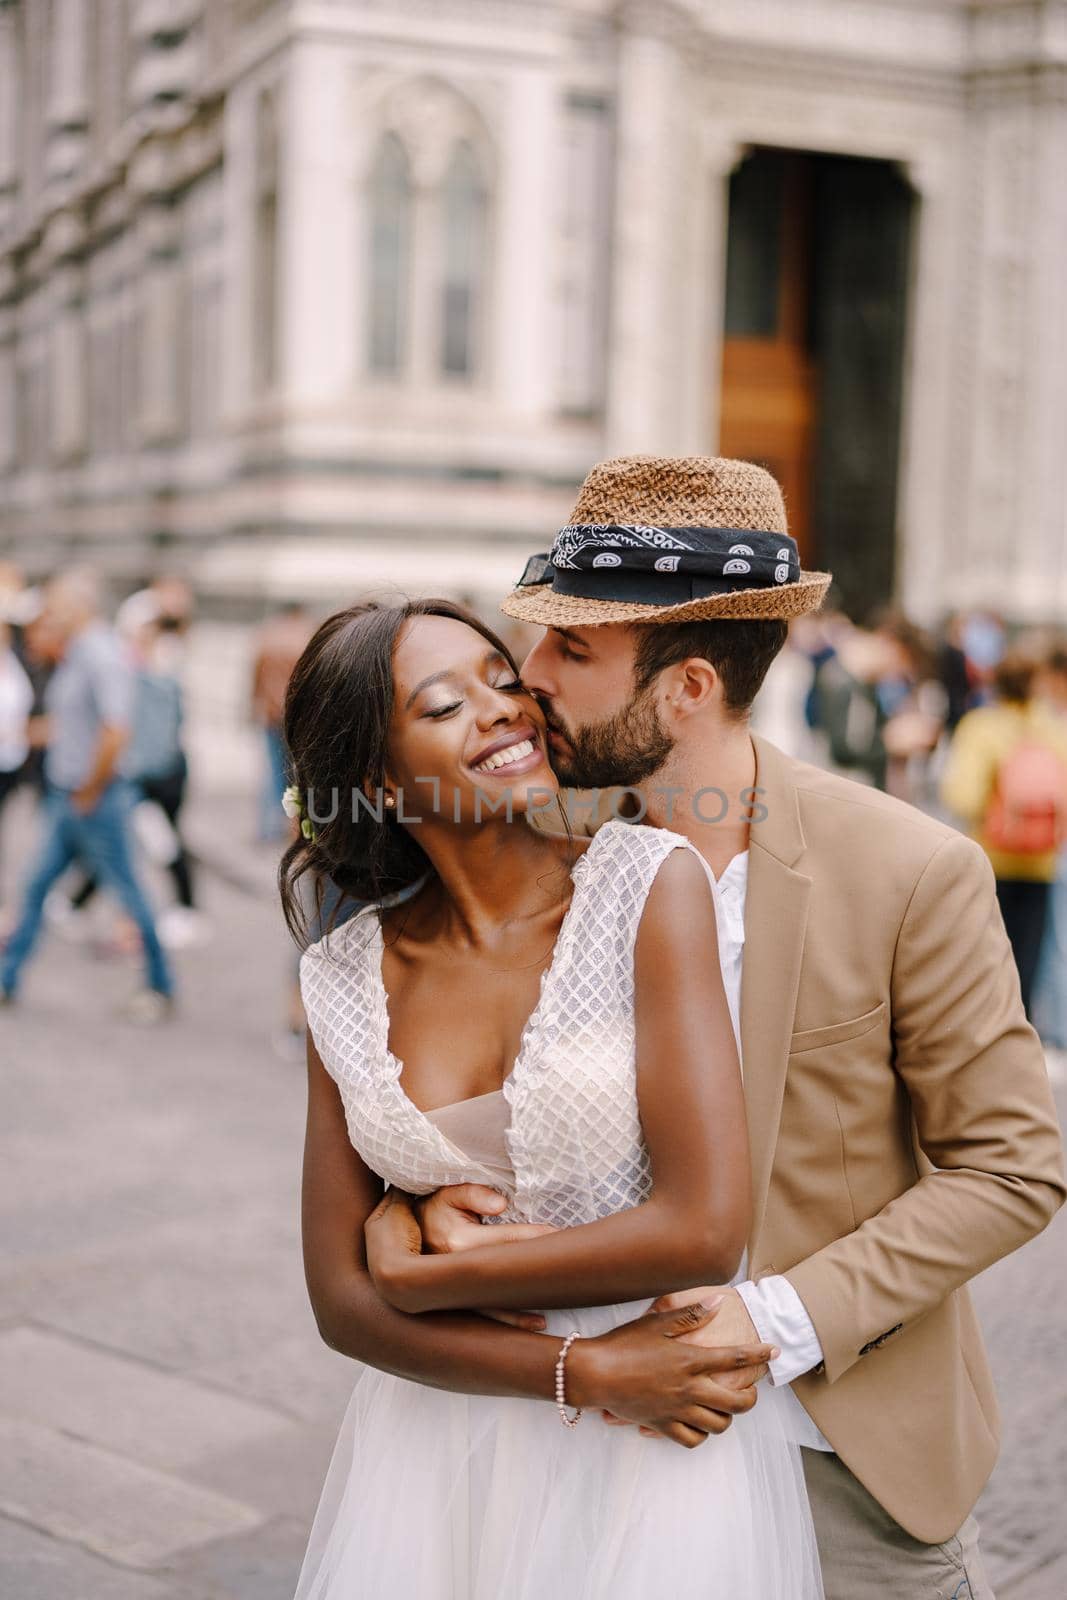 Interracial wedding couple. Wedding in Florence, Italy. Caucasian groom hugs from behind and kisses African-American bride. by Nadtochiy